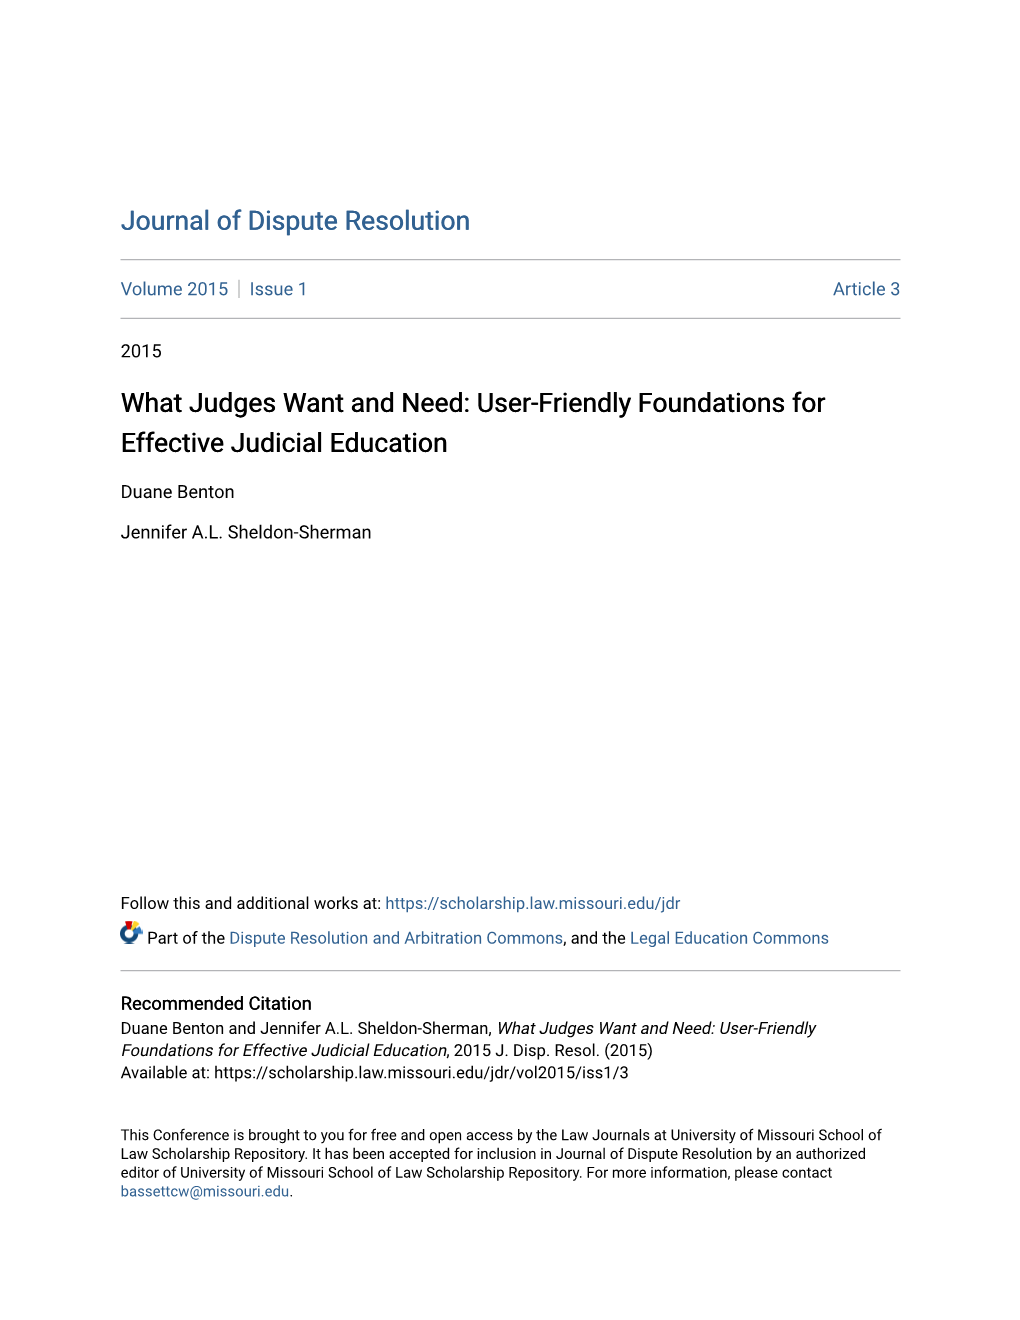 What Judges Want and Need: User-Friendly Foundations for Effective Judicial Education